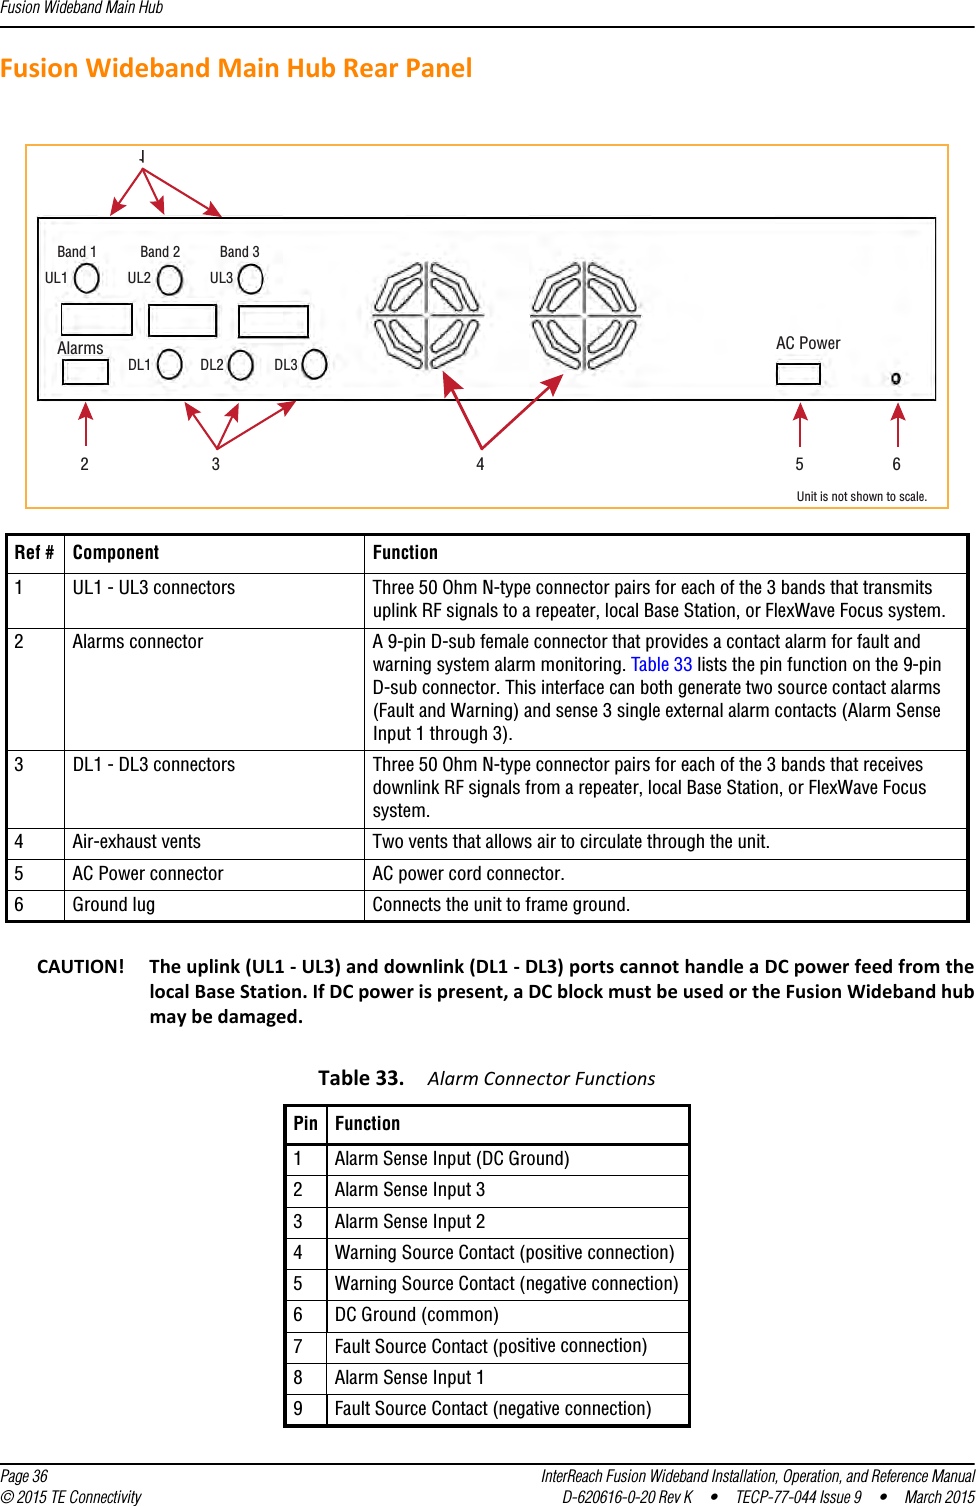 Fusion Wideband Main Hub  Page 36 InterReach Fusion Wideband Installation, Operation, and Reference Manual© 2015 TE Connectivity D-620616-0-20 Rev K  •  TECP-77-044 Issue 9  •  March 2015Fusion Wideband Main Hub Rear PanelCAUTION! The uplink (UL1 - UL3) and downlink (DL1 - DL3) ports cannot handle a DC power feed from the local Base Station. If DC power is present, a DC block must be used or the Fusion Wideband hub may be damaged.Ref # Component Function1UL1 - UL3 connectors Three 50 Ohm N-type connector pairs for each of the 3 bands that transmits uplink RF signals to a repeater, local Base Station, or FlexWave Focus system.2Alarms connector A 9-pin D-sub female connector that provides a contact alarm for fault and warning system alarm monitoring. Table 33 lists the pin function on the 9-pin D-sub connector. This interface can both generate two source contact alarms (Fault and Warning) and sense 3 single external alarm contacts (Alarm Sense Input 1 through 3).3DL1 - DL3 connectors Three 50 Ohm N-type connector pairs for each of the 3 bands that receives downlink RF signals from a repeater, local Base Station, or FlexWave Focus system.4Air-exhaust vents Two vents that allows air to circulate through the unit.5AC Power connector AC power cord connector.6Ground lug Connects the unit to frame ground.Table 33. Alarm Connector Functions Pin Function1Alarm Sense Input (DC Ground)2Alarm Sense Input 33Alarm Sense Input 24Warning Source Contact (positive connection)5Warning Source Contact (negative connection)6DC Ground (common)7Fault Source Contact (positive connection)8Alarm Sense Input 19Fault Source Contact (negative connection)2 54Unit is not shown to scale.Alarms AC PowerBand 1 Band 2 Band 3UL1 UL2 UL3DL1 DL2 DL3361